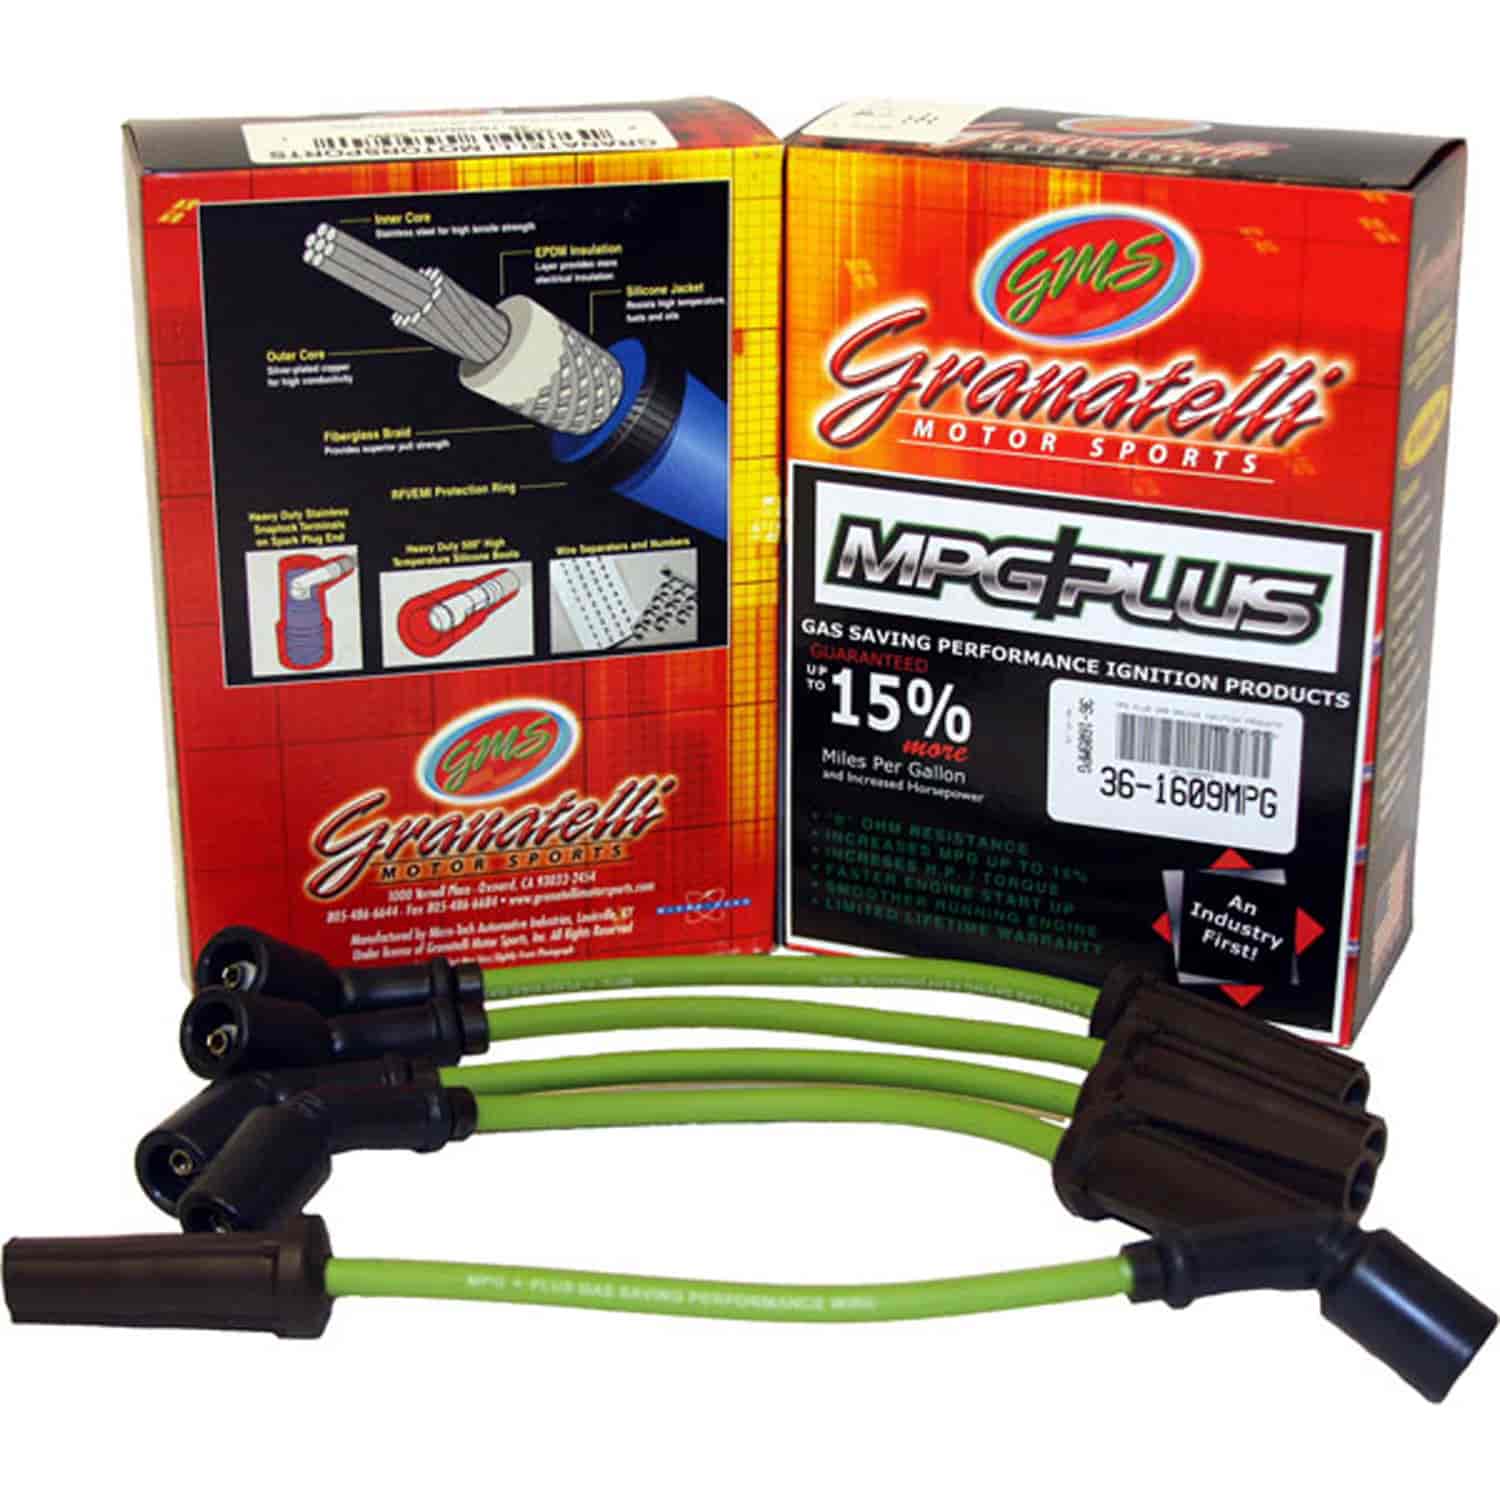 MPG Wires VOLVO 940 SERIES 4CYL 2.3L 91-95